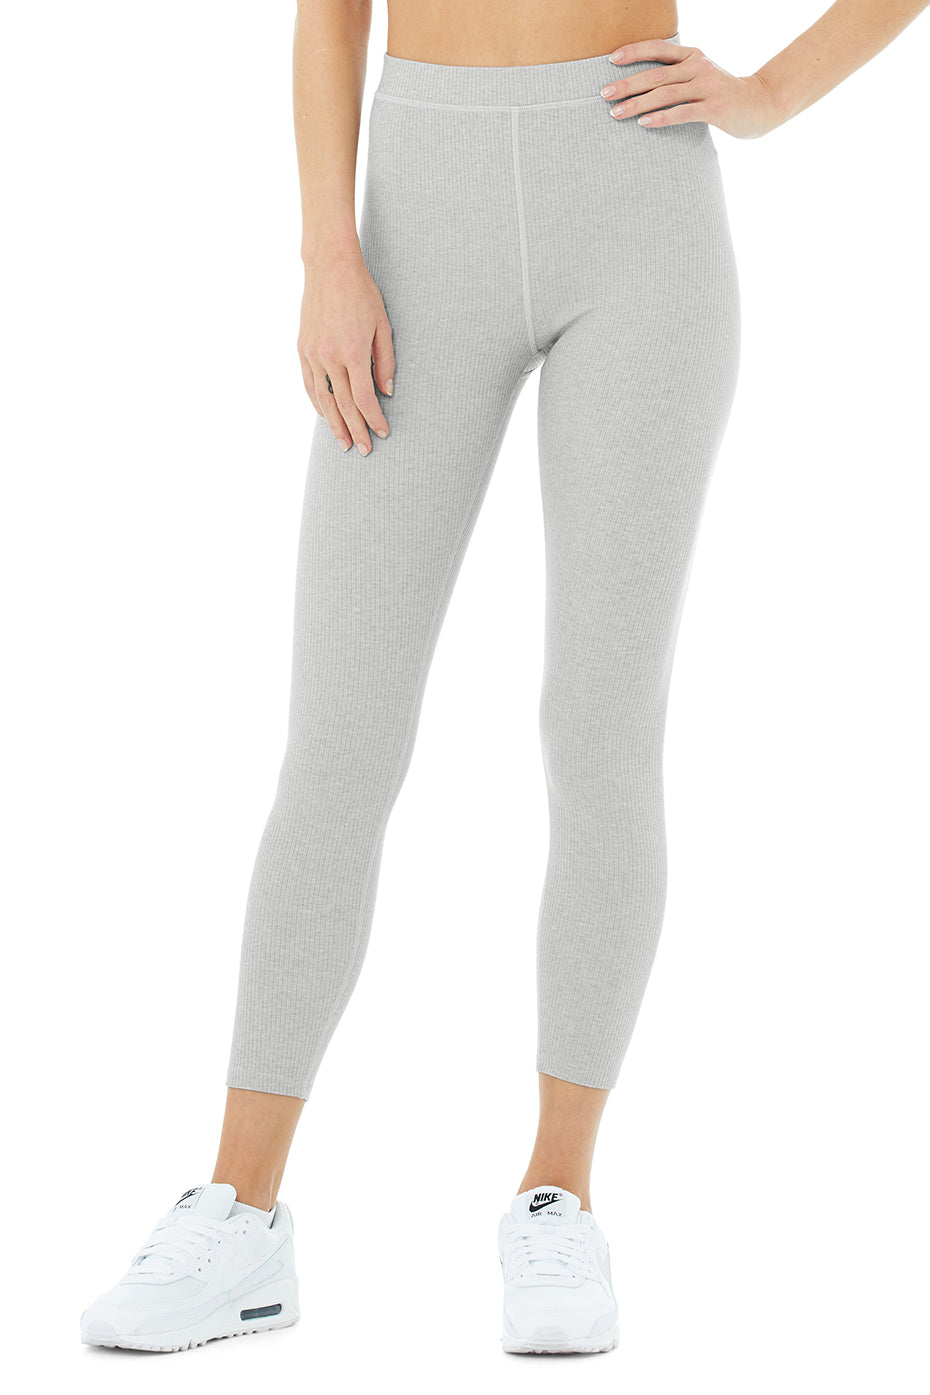 Beyond Yoga Space Dye Grey Mid Rise Leggings Small - $13 - From bria